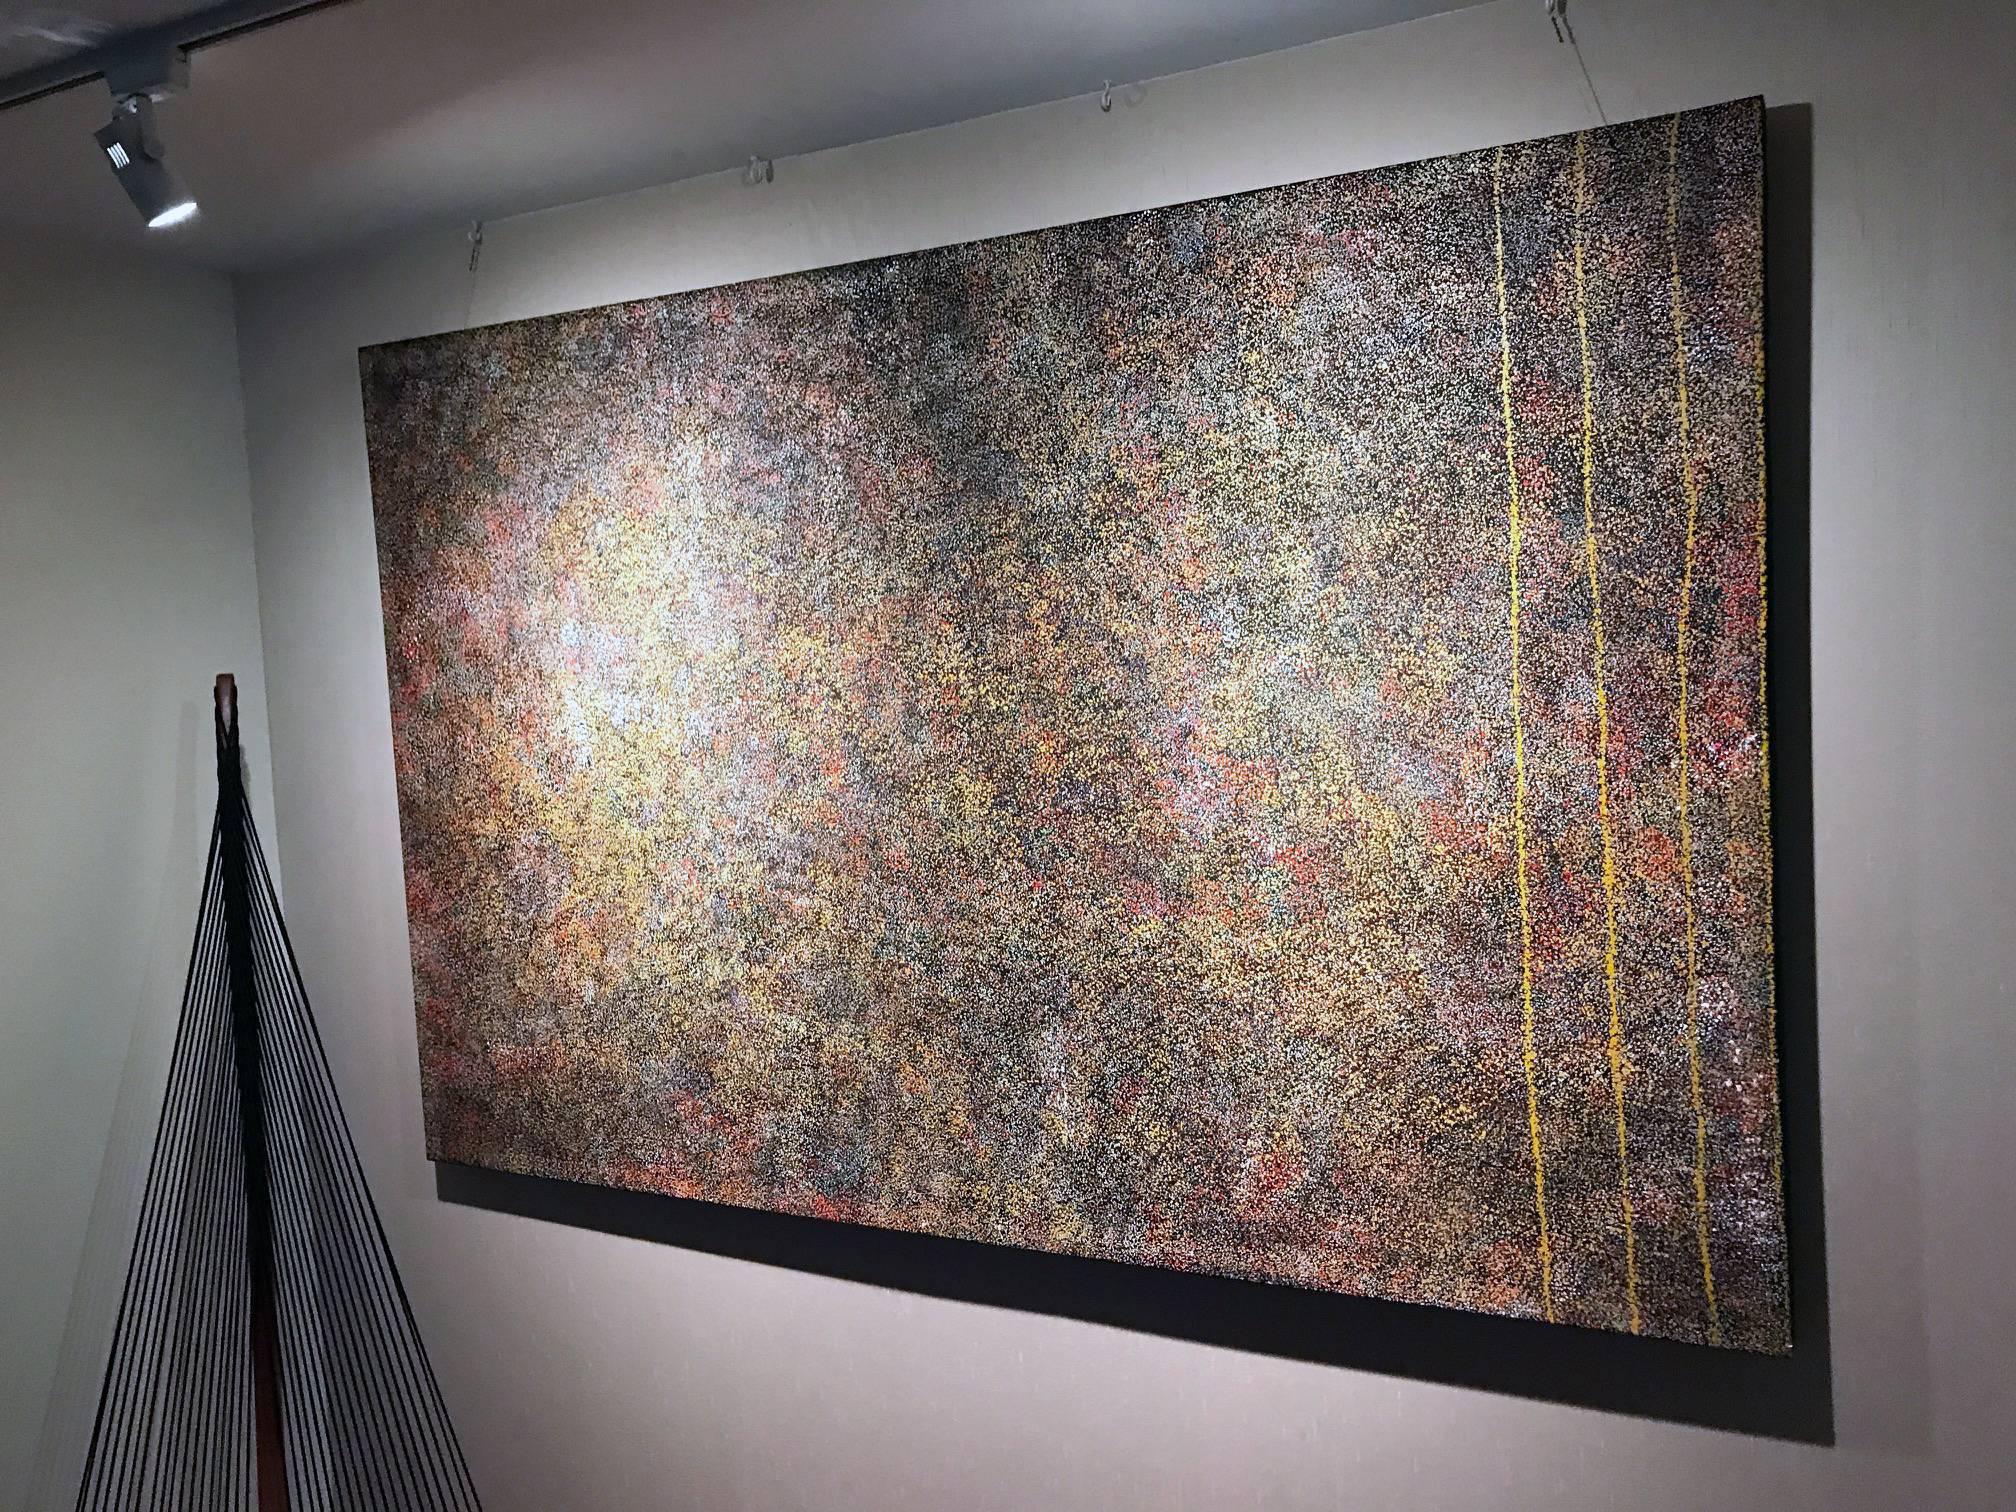 This large painting is one of the two frequent designs by the famed aboriginal artist Kathleen Petyarre which depicts the artists' home country. By using minutia of dots in different hues, the artist created an impression of aerial view of her home